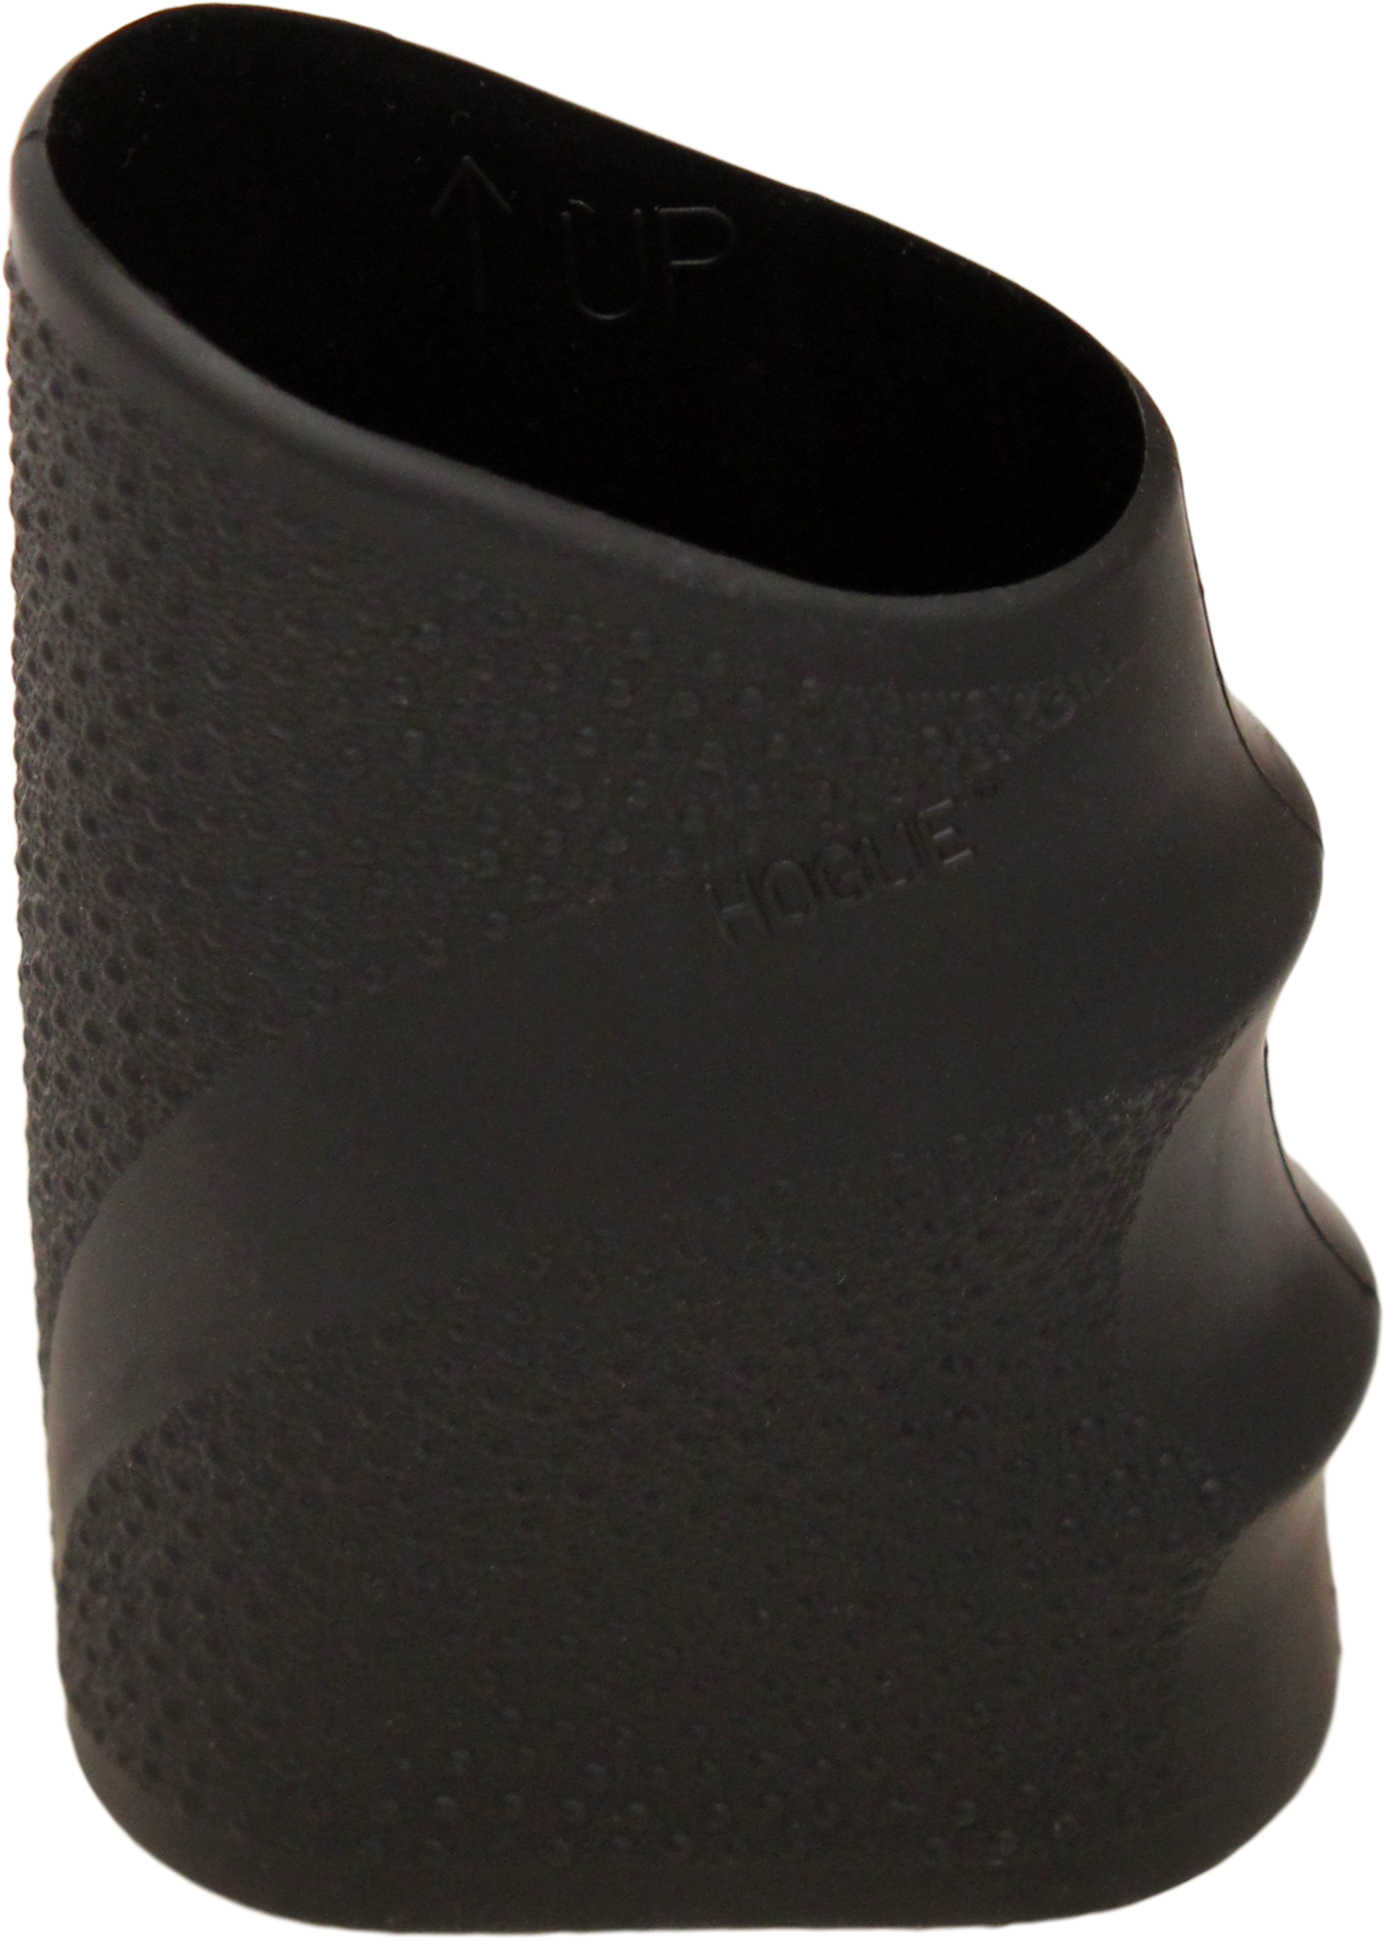 Hogue Handall Grip Sleeve Tactical Large Black 17210-img-1